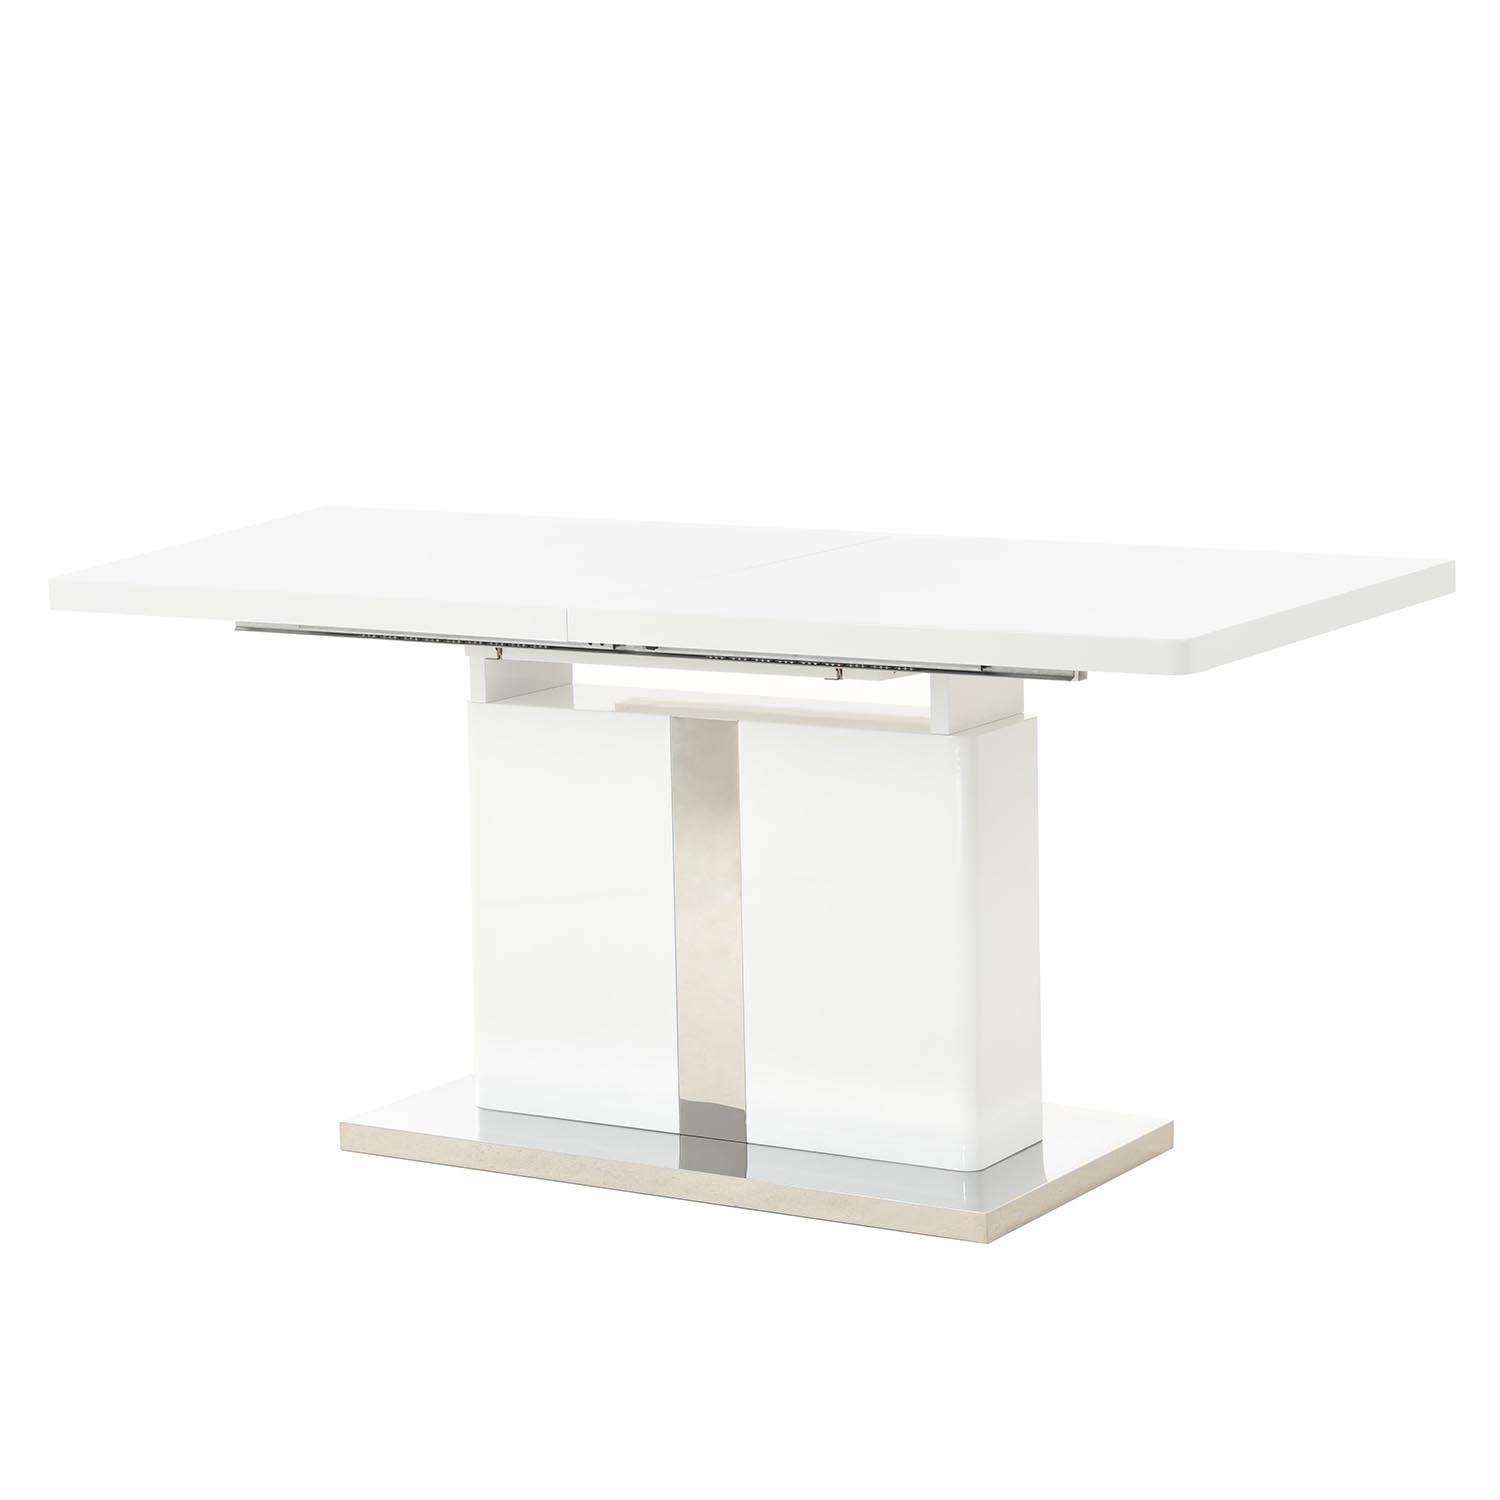 Marcellini 6 Seater 160 to 200cm Extending Table White Image 4